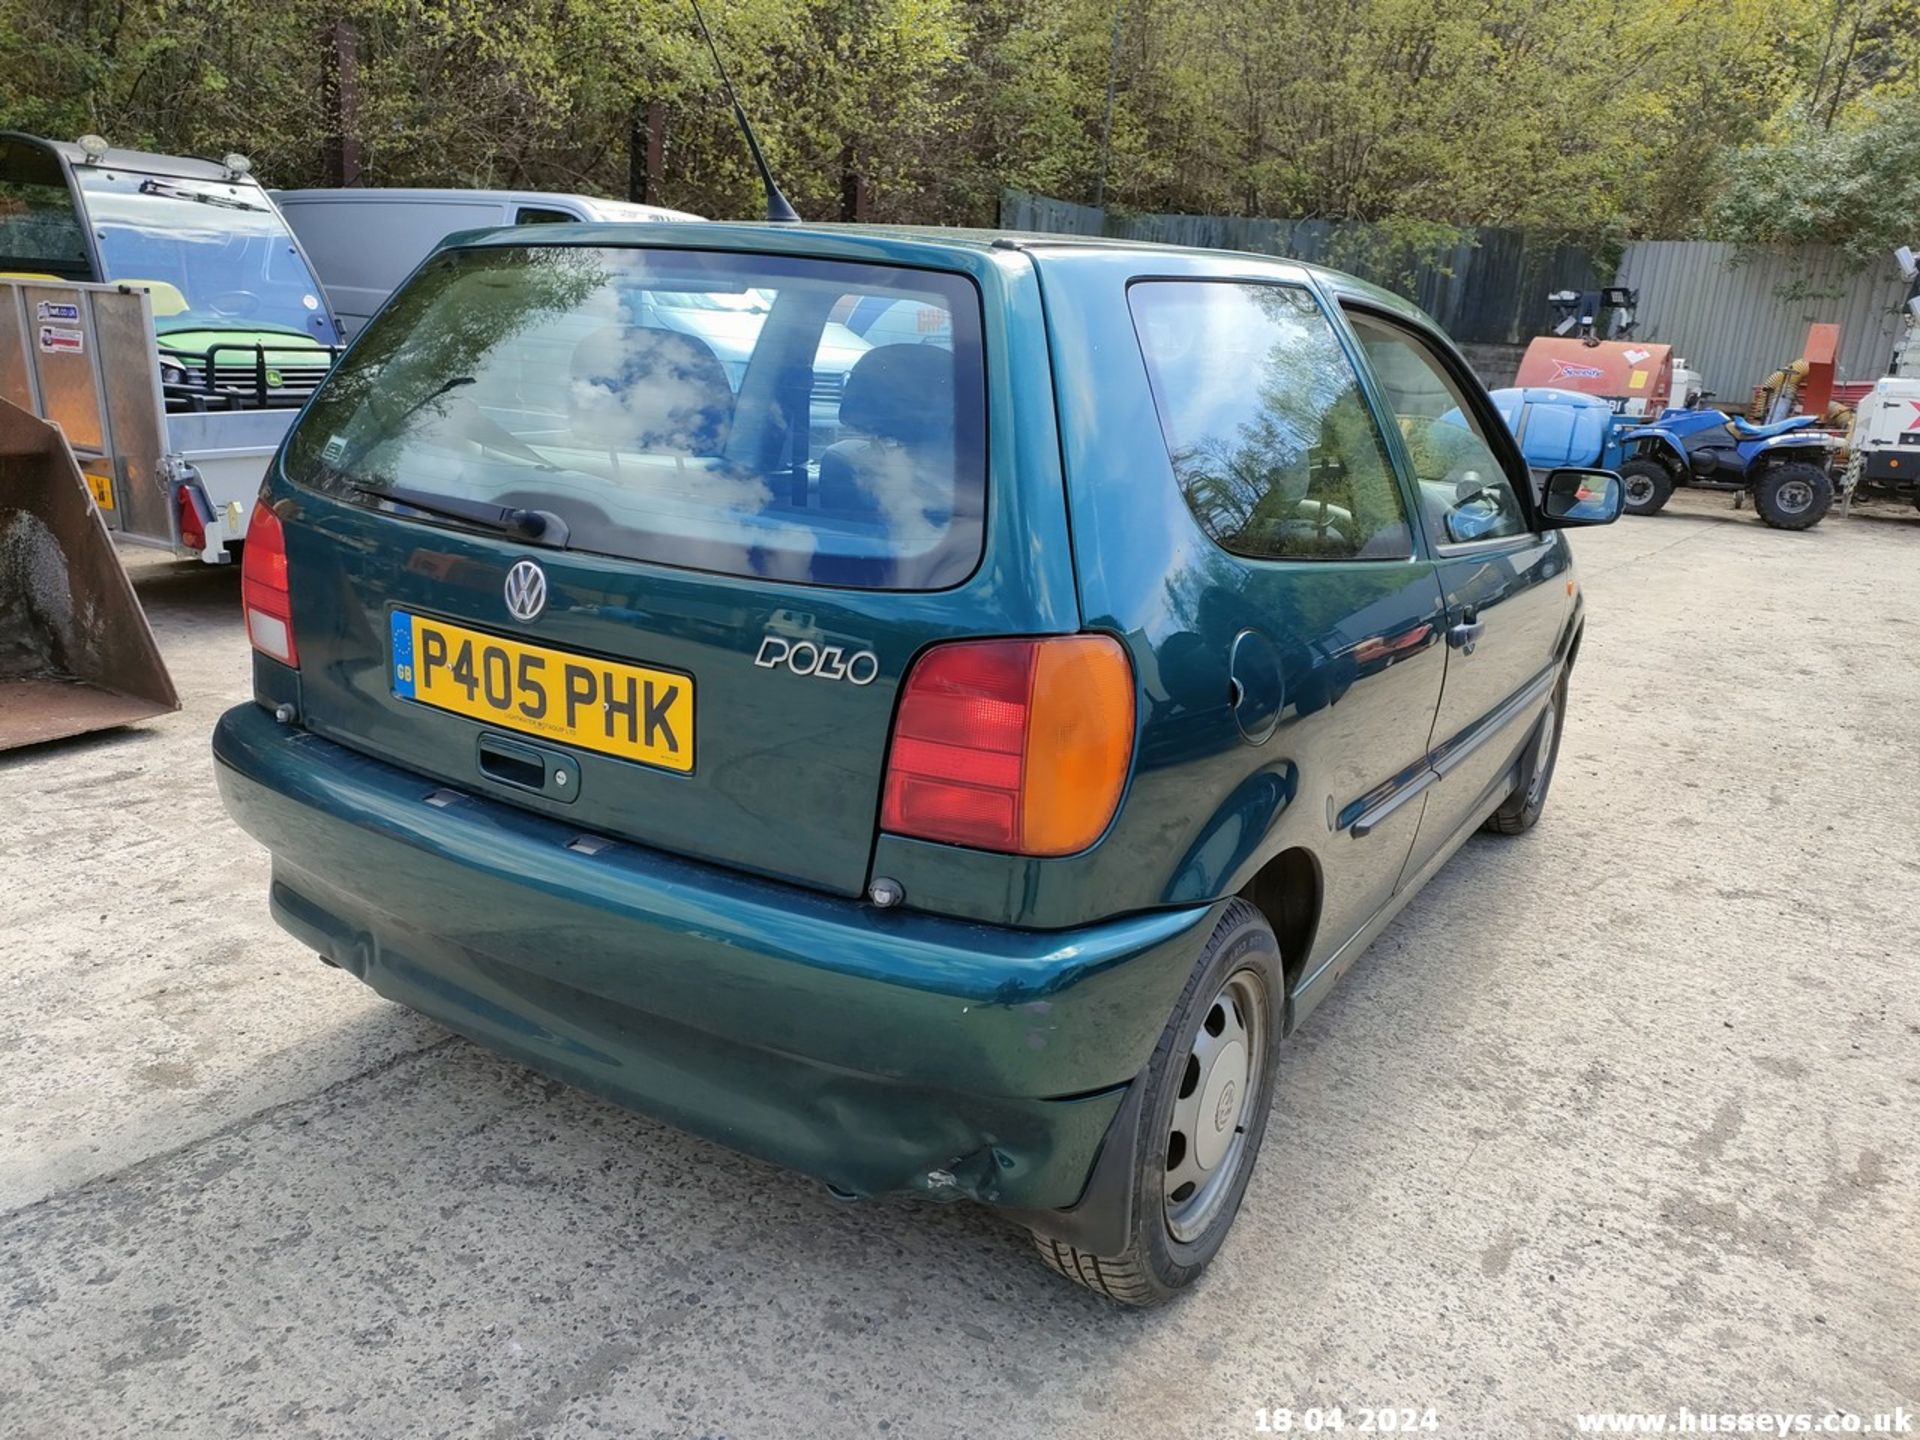 1997 VOLKSWAGEN POLO 1.4 CL AUTO - 1390cc 3dr Hatchback (Green, 68k) - Image 33 of 60